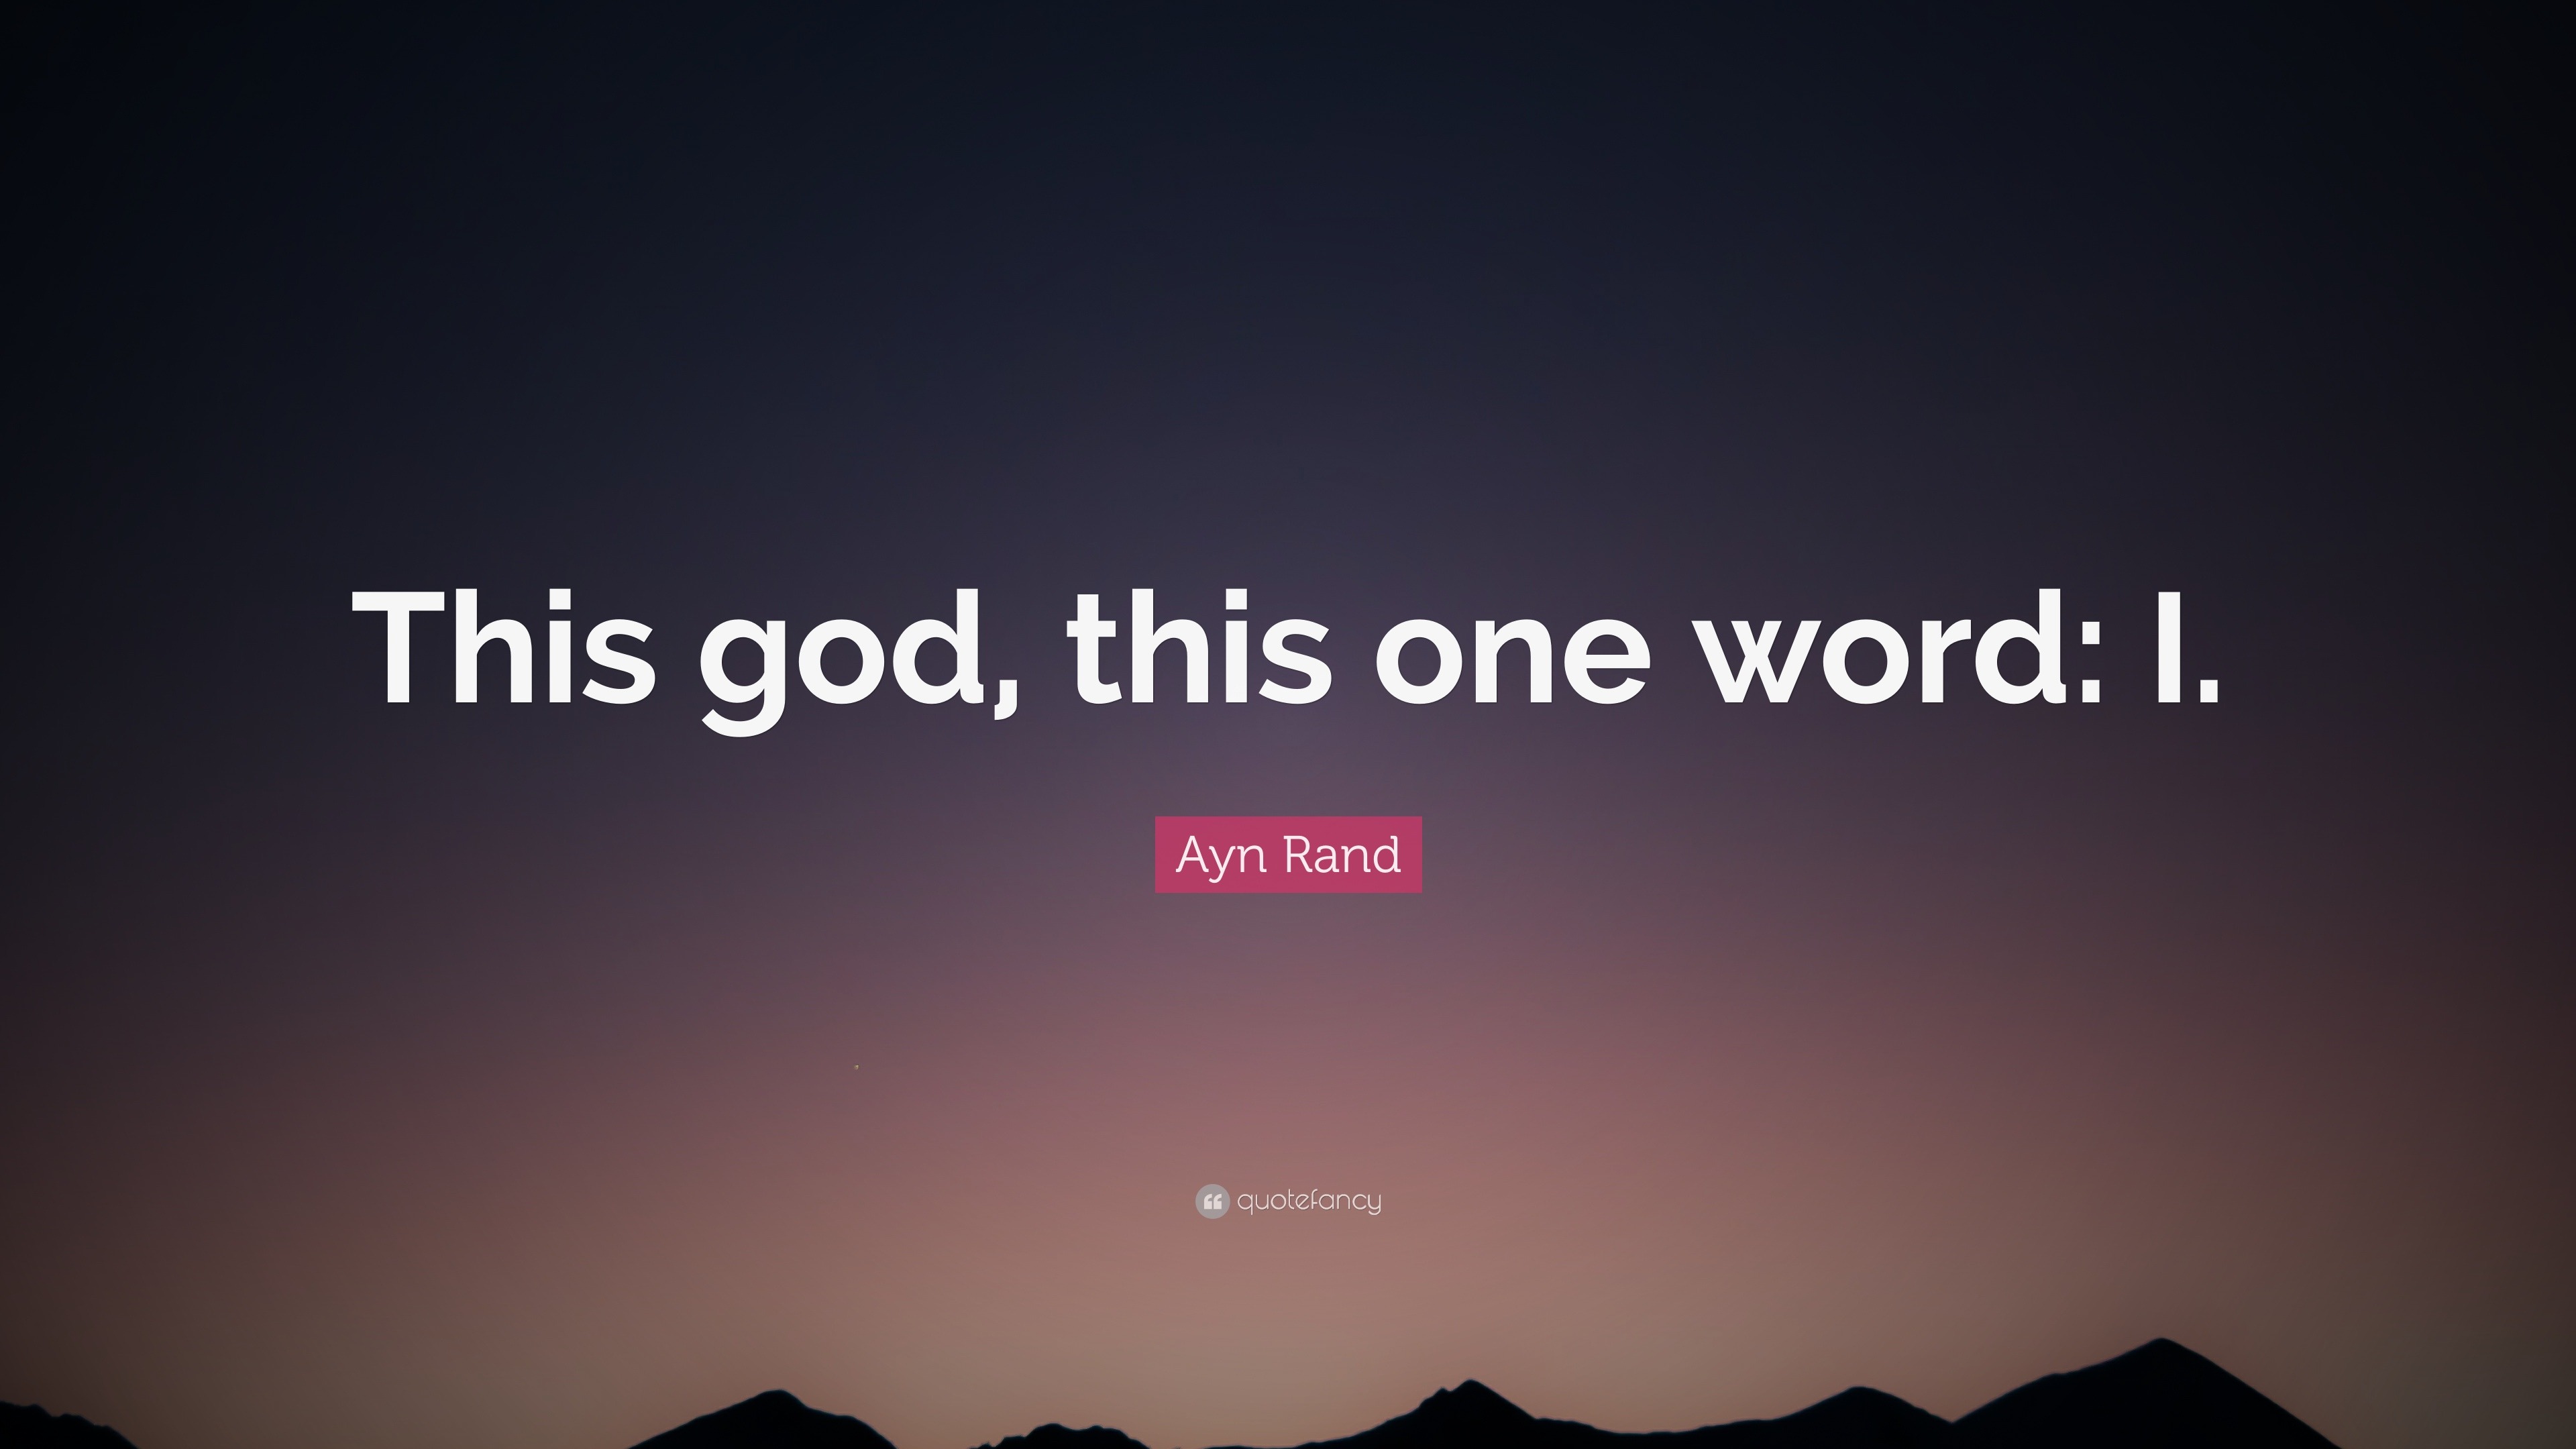 Ayn Rand Quote “This god this one word I ”